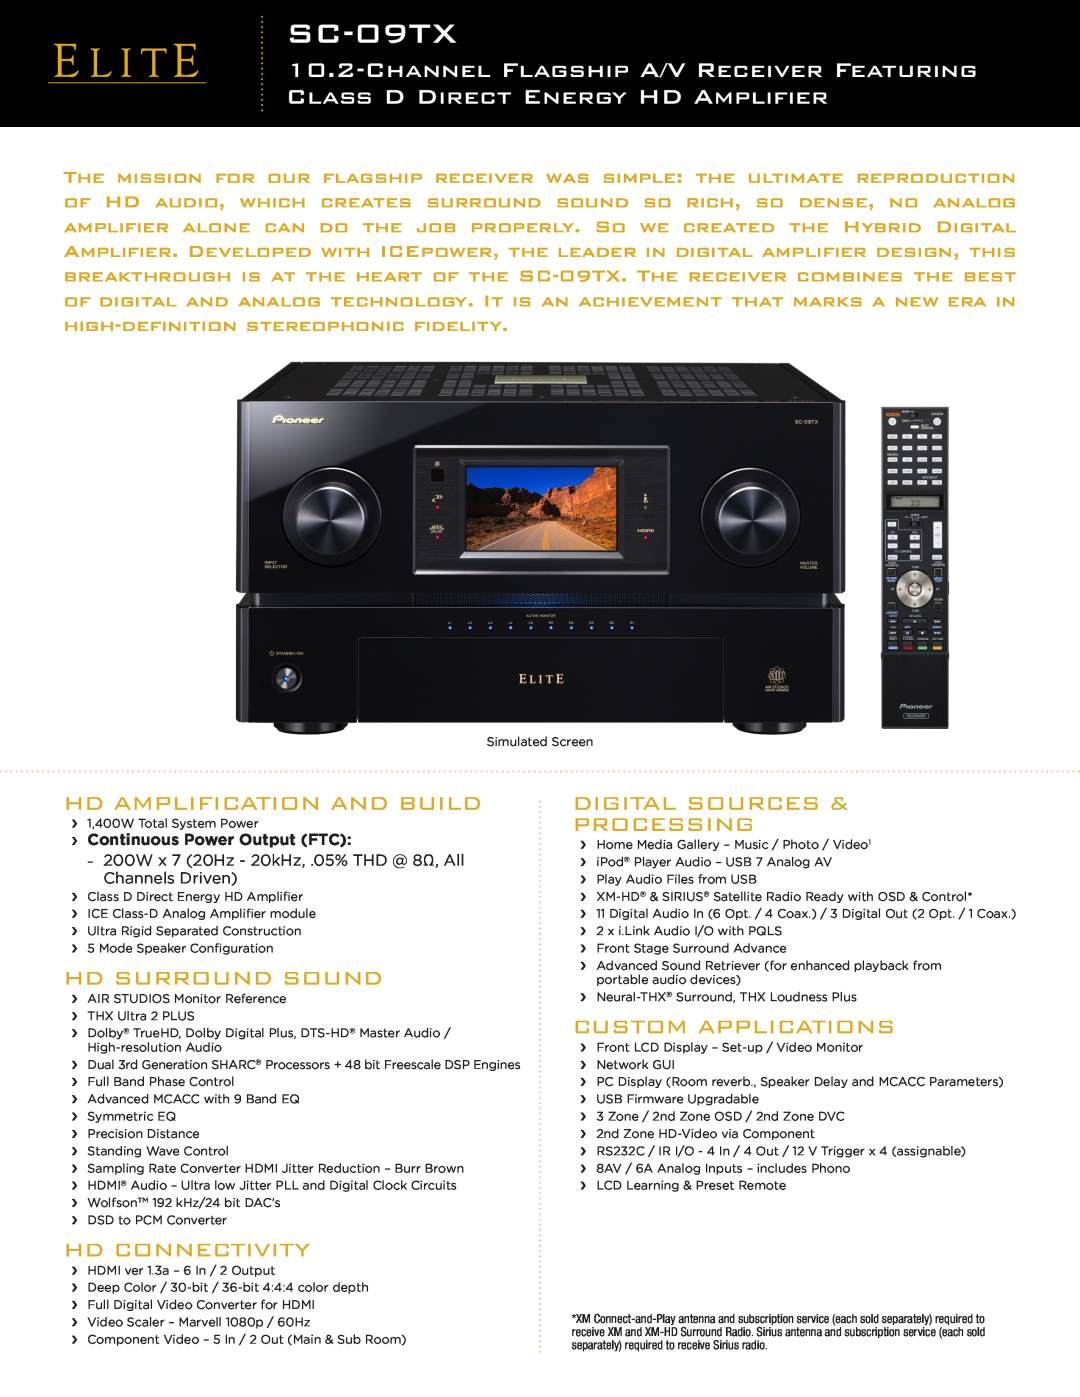 Pioneer SC-09TX manual Hd Amplification And Build, Hd Surround Sound, Digital Sources, Hd Connectivity, Processing 